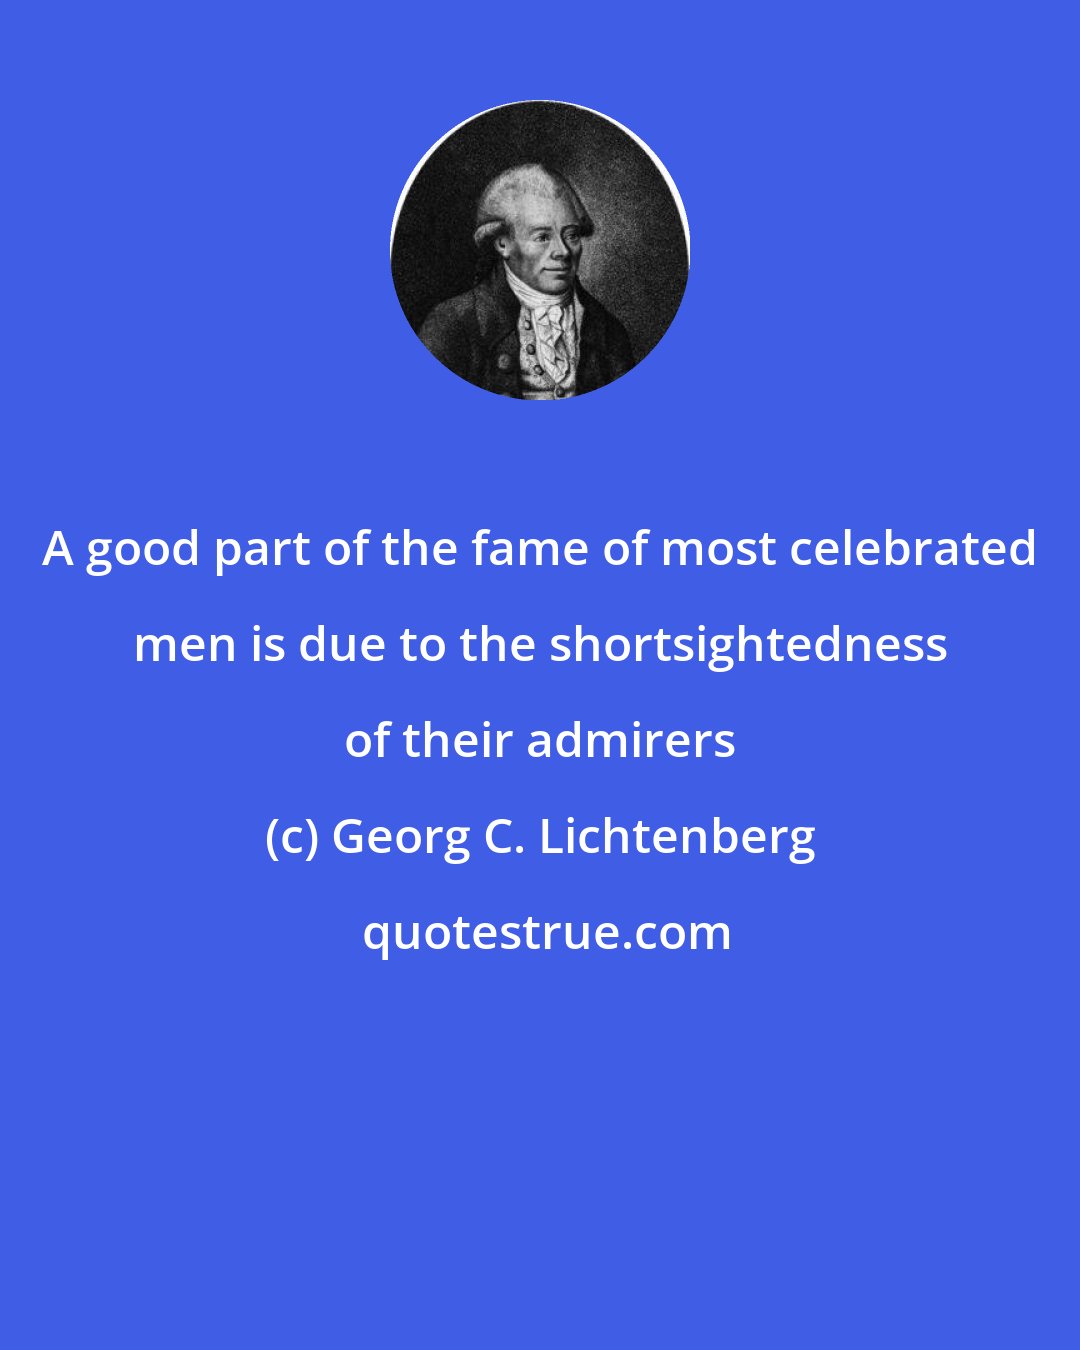 Georg C. Lichtenberg: A good part of the fame of most celebrated men is due to the shortsightedness of their admirers